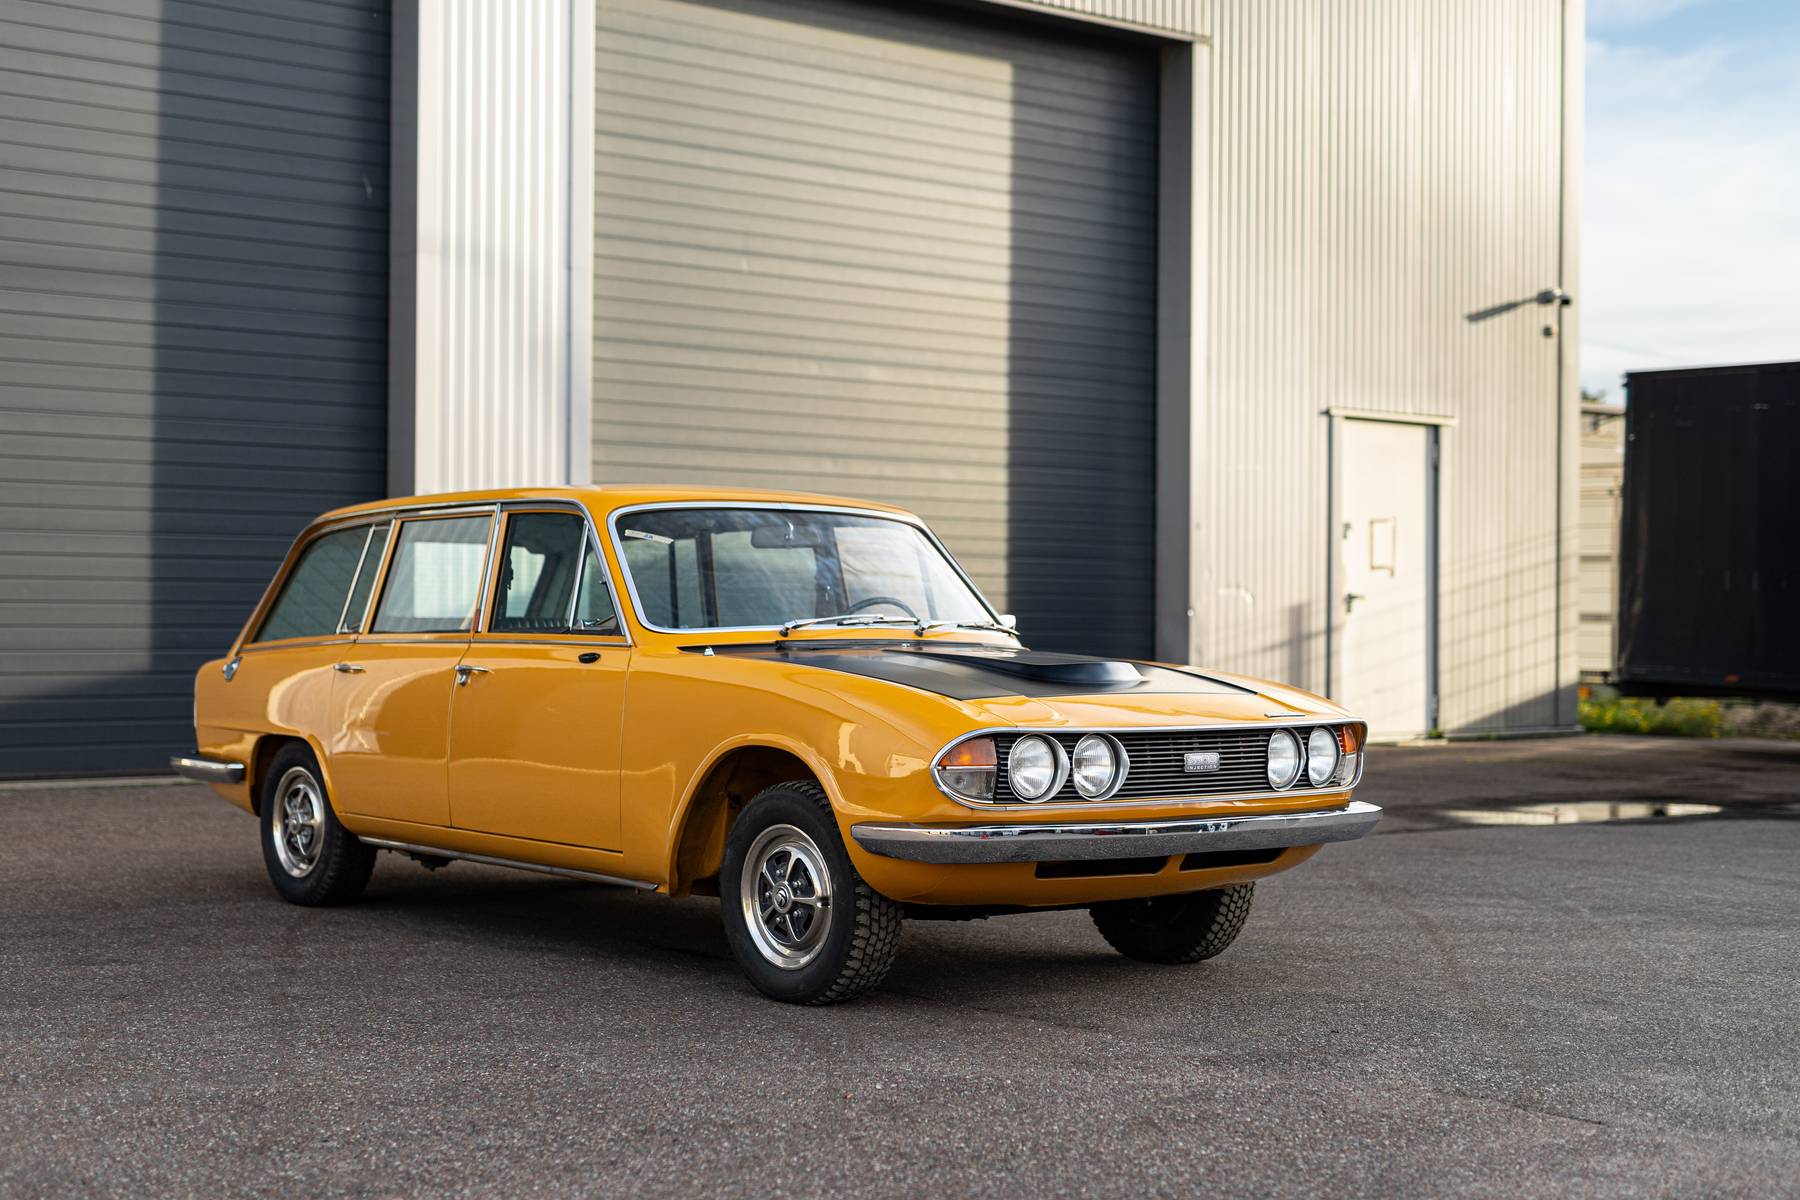 What the doctor ordered: Triumph 2500 PI estate 4×4